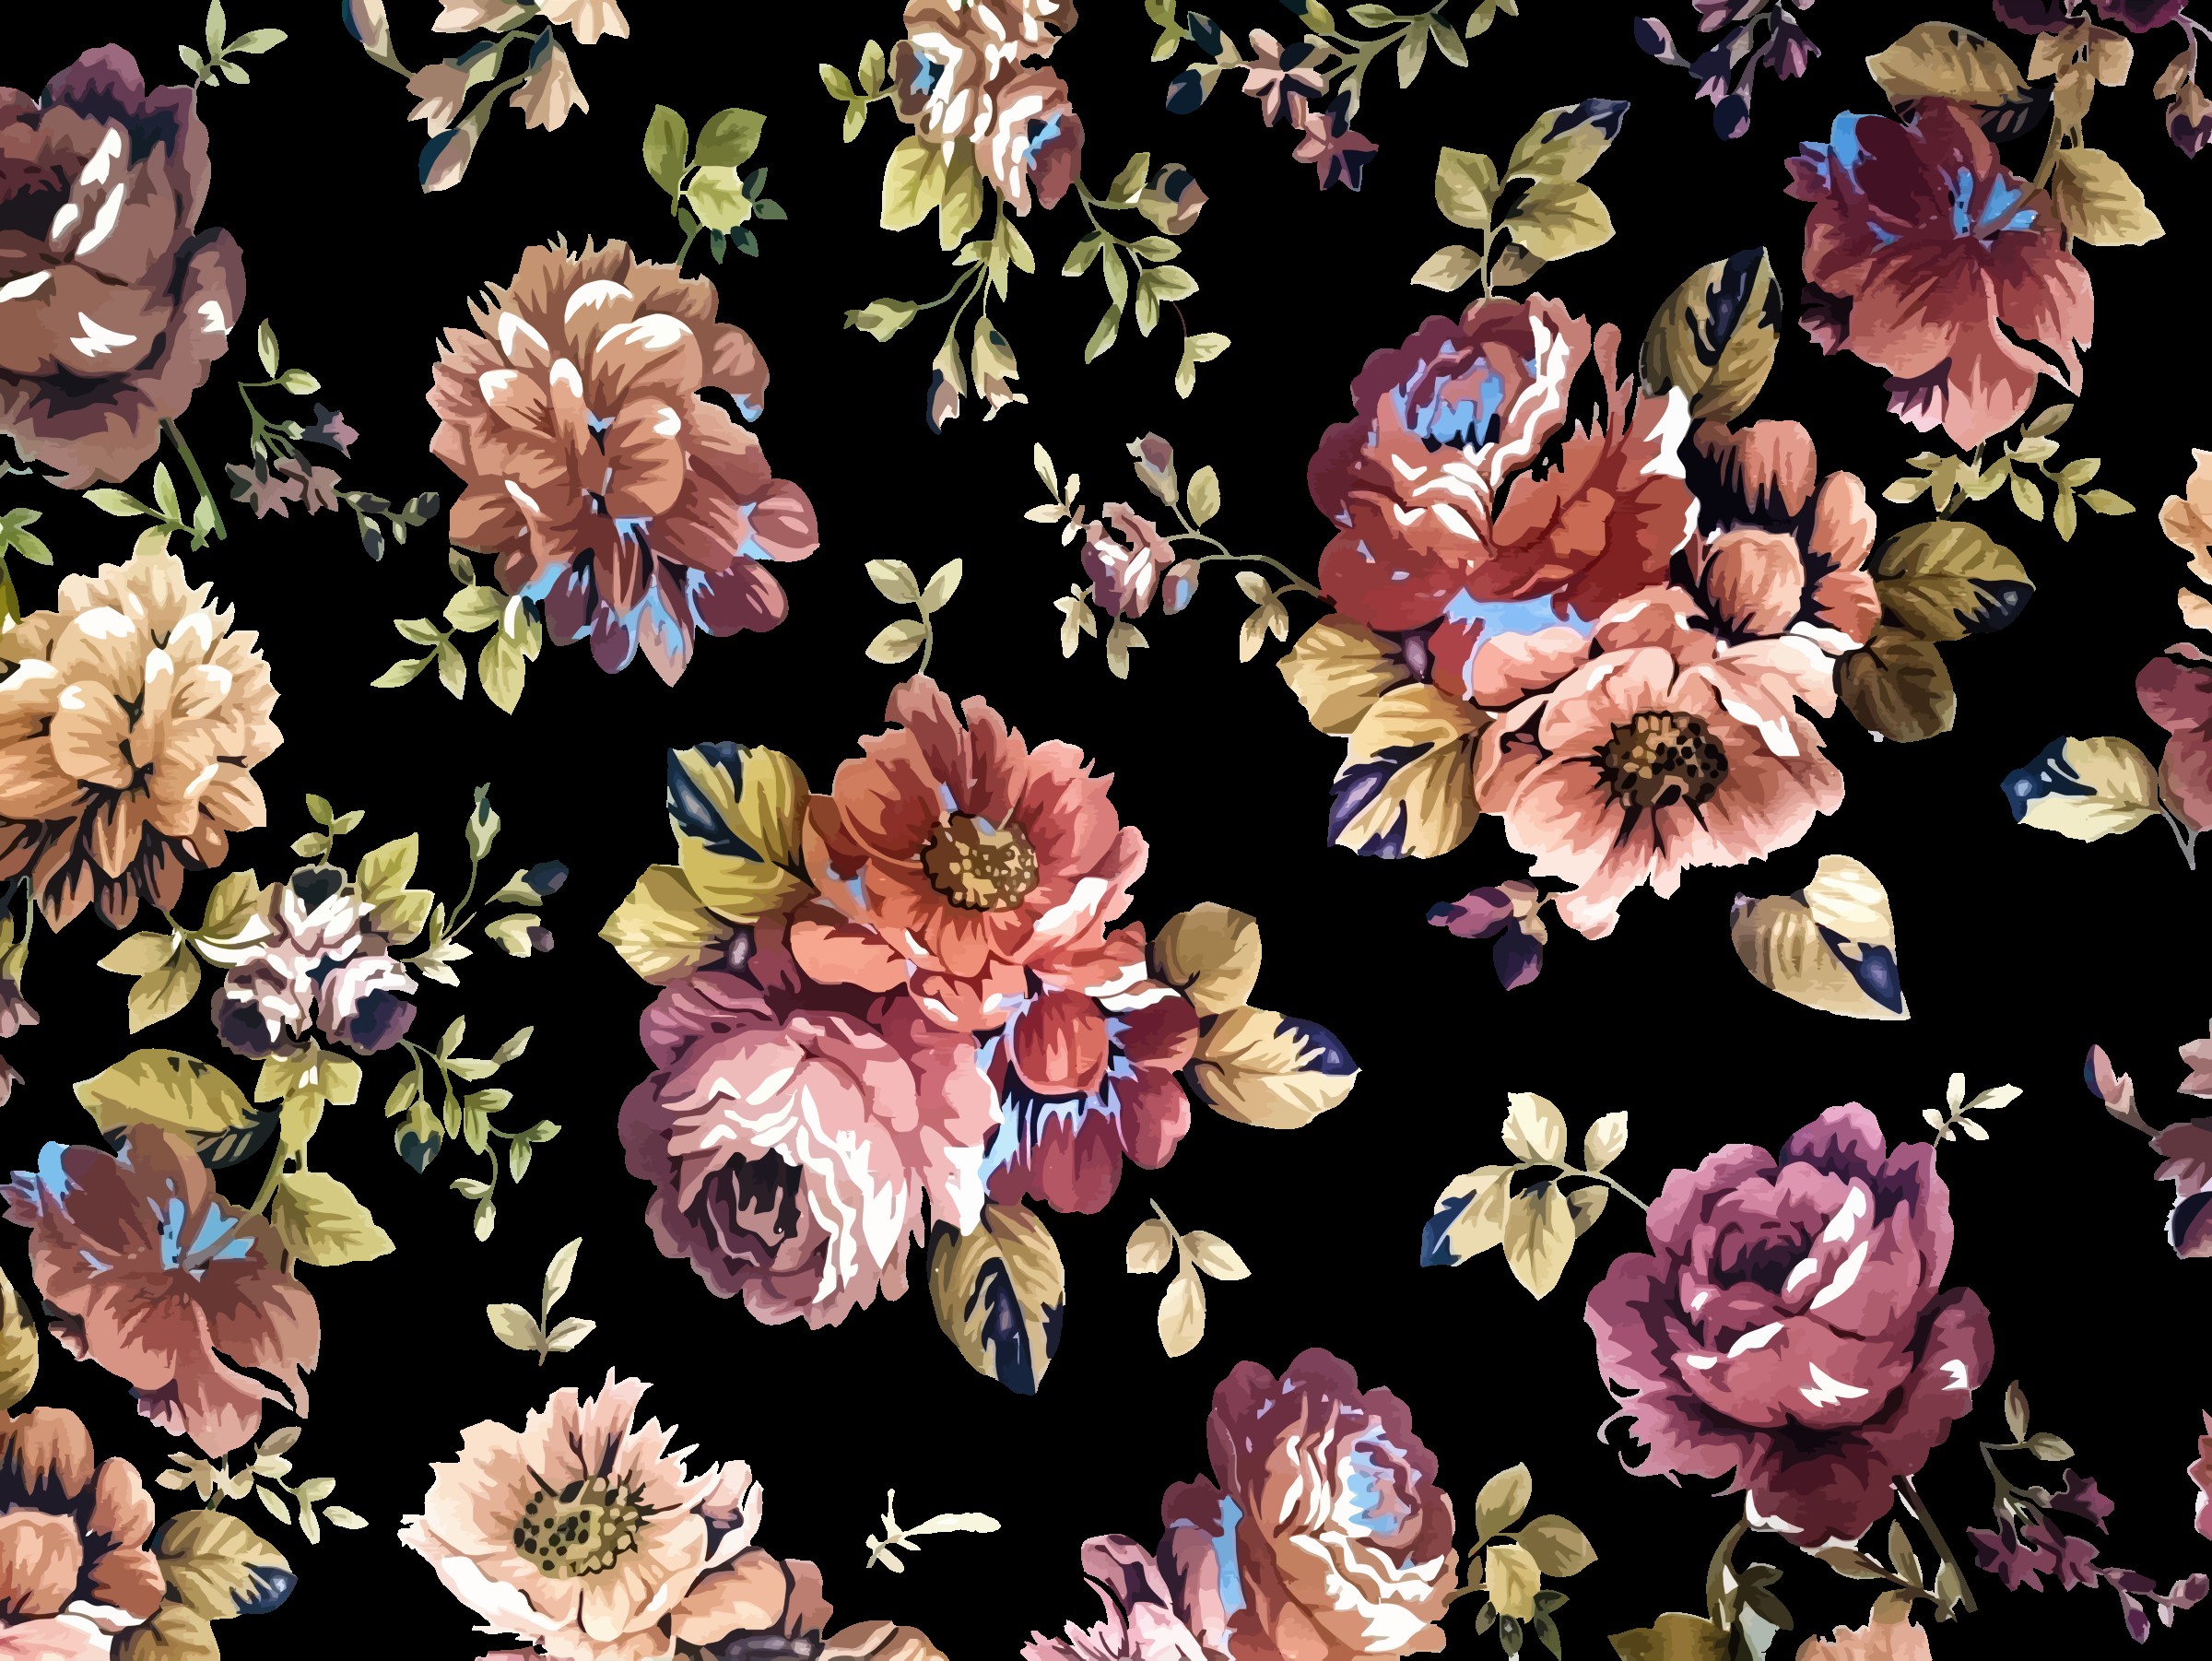 Vintage Floral background ·① Download free cool full HD backgrounds for desktop computers and